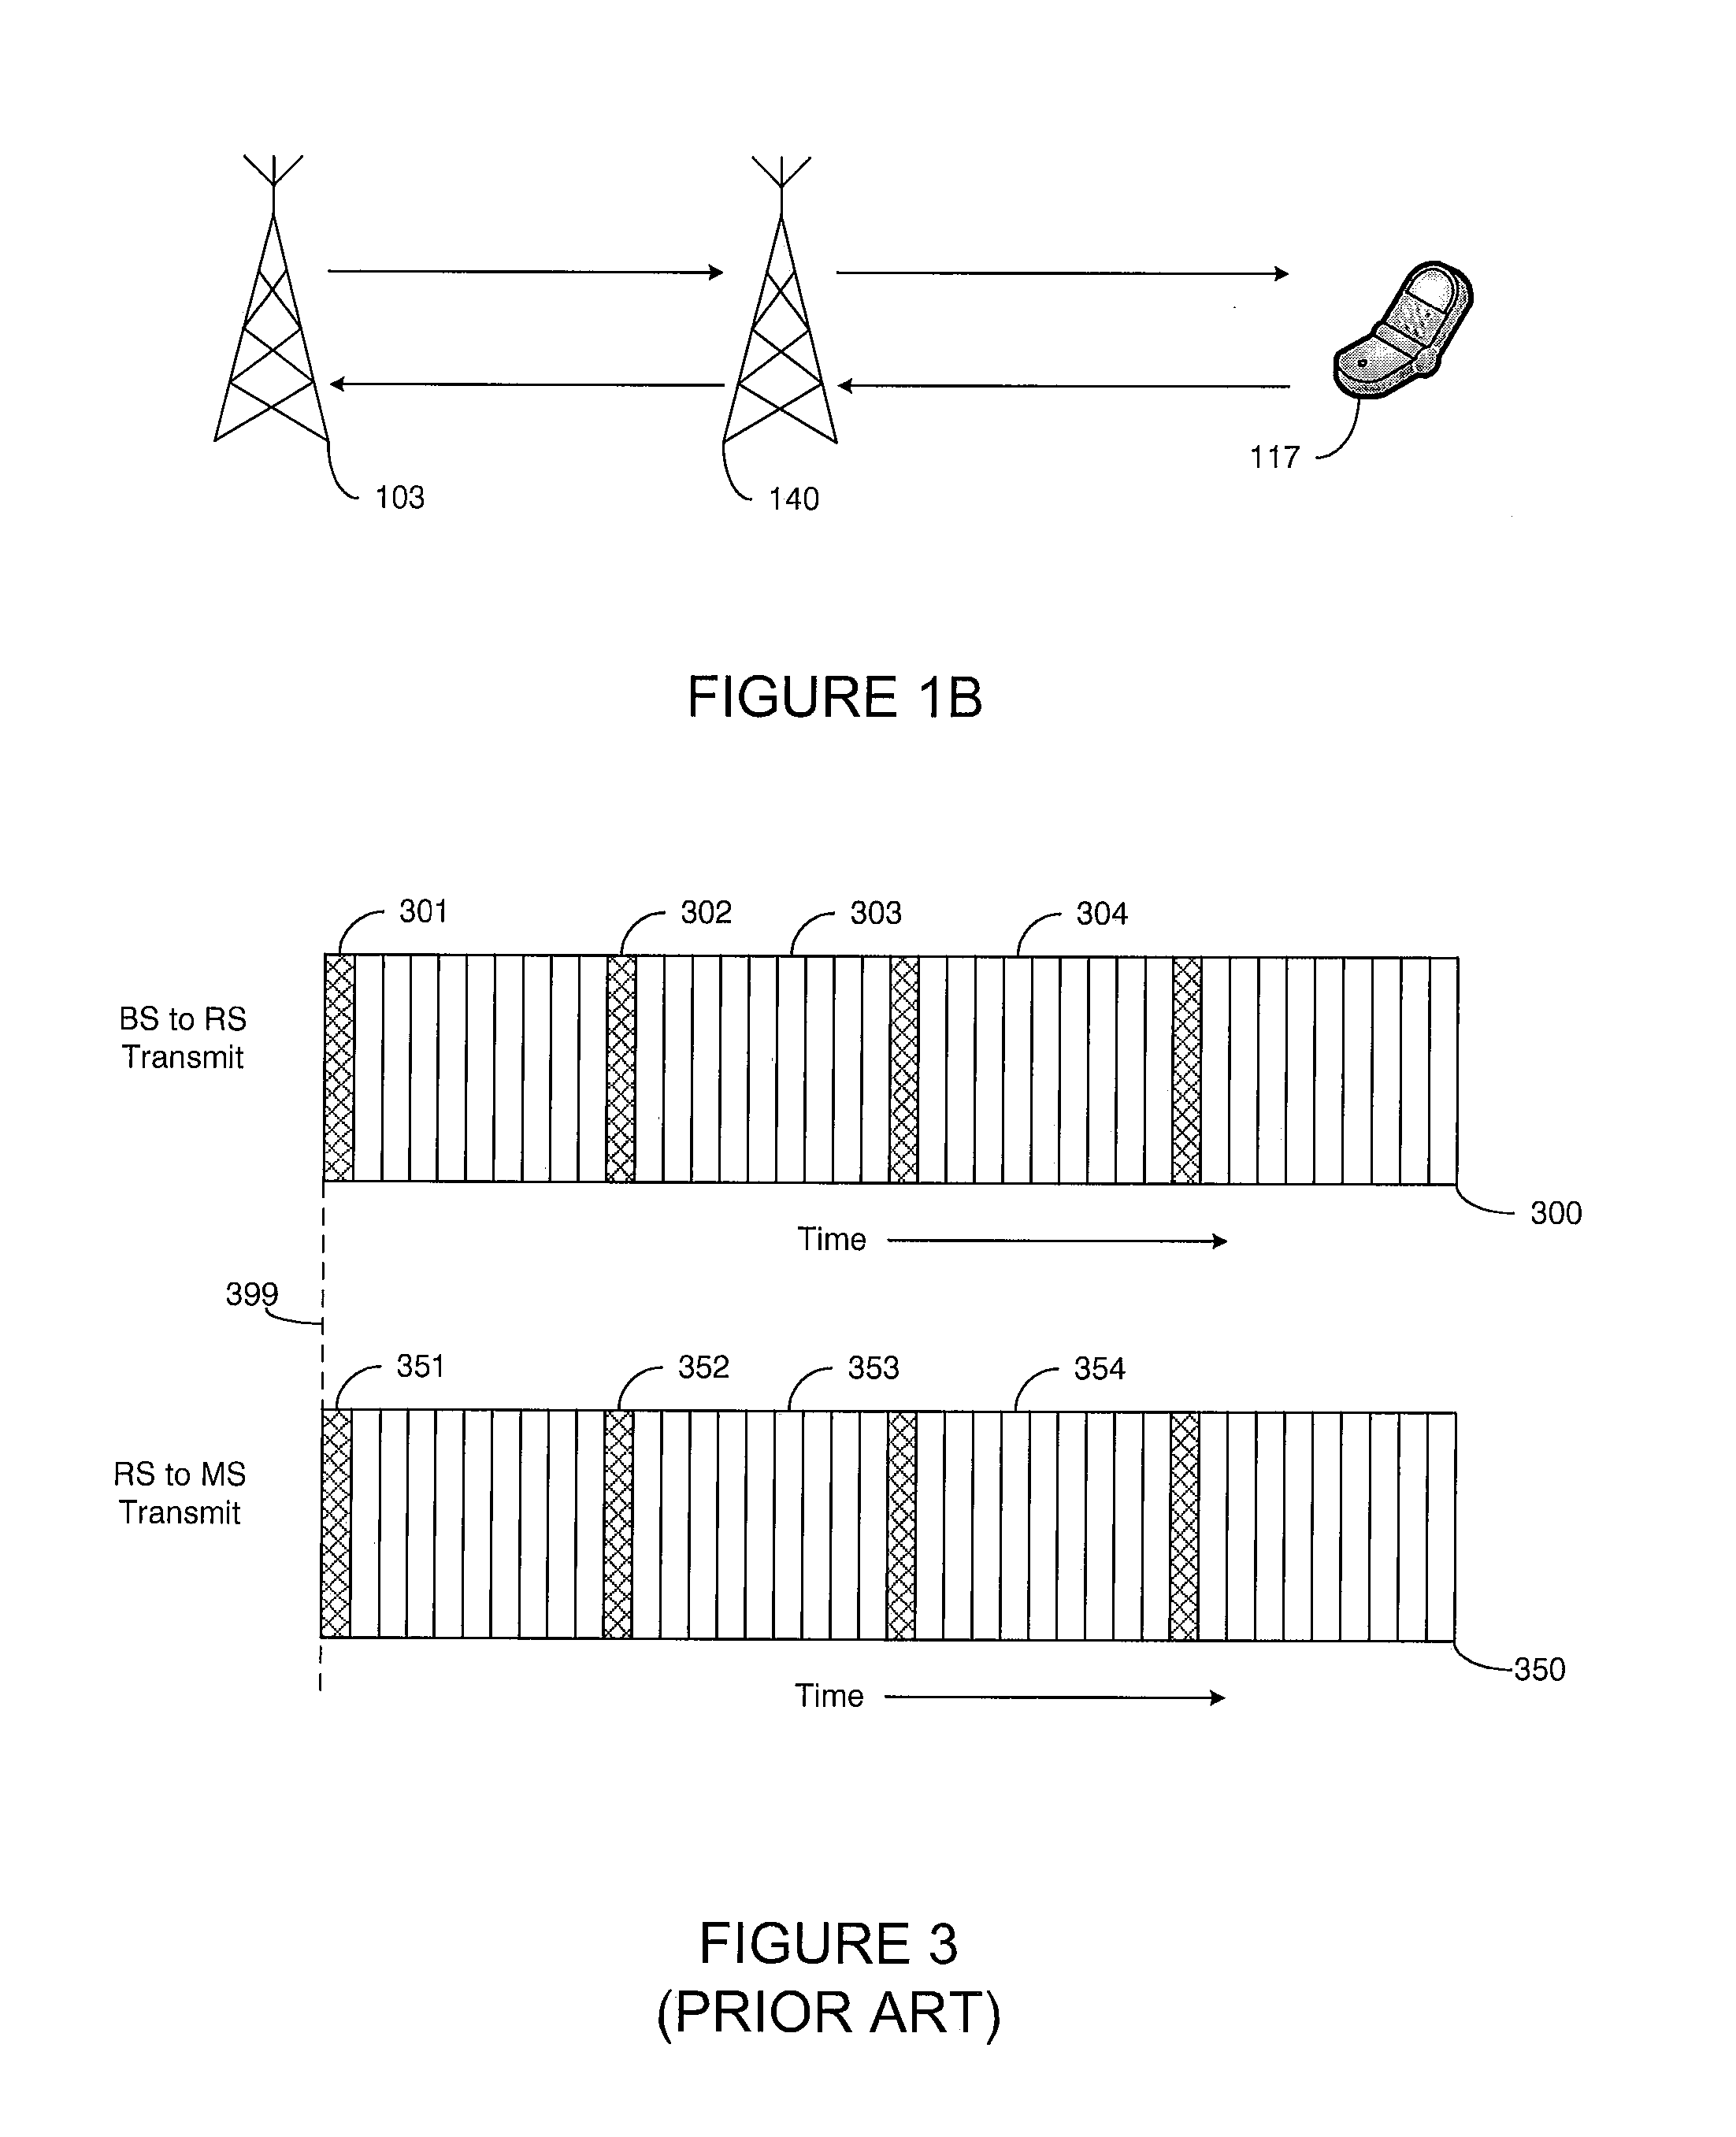 Method and apparatus for relaying wireless traffic in a wireless network